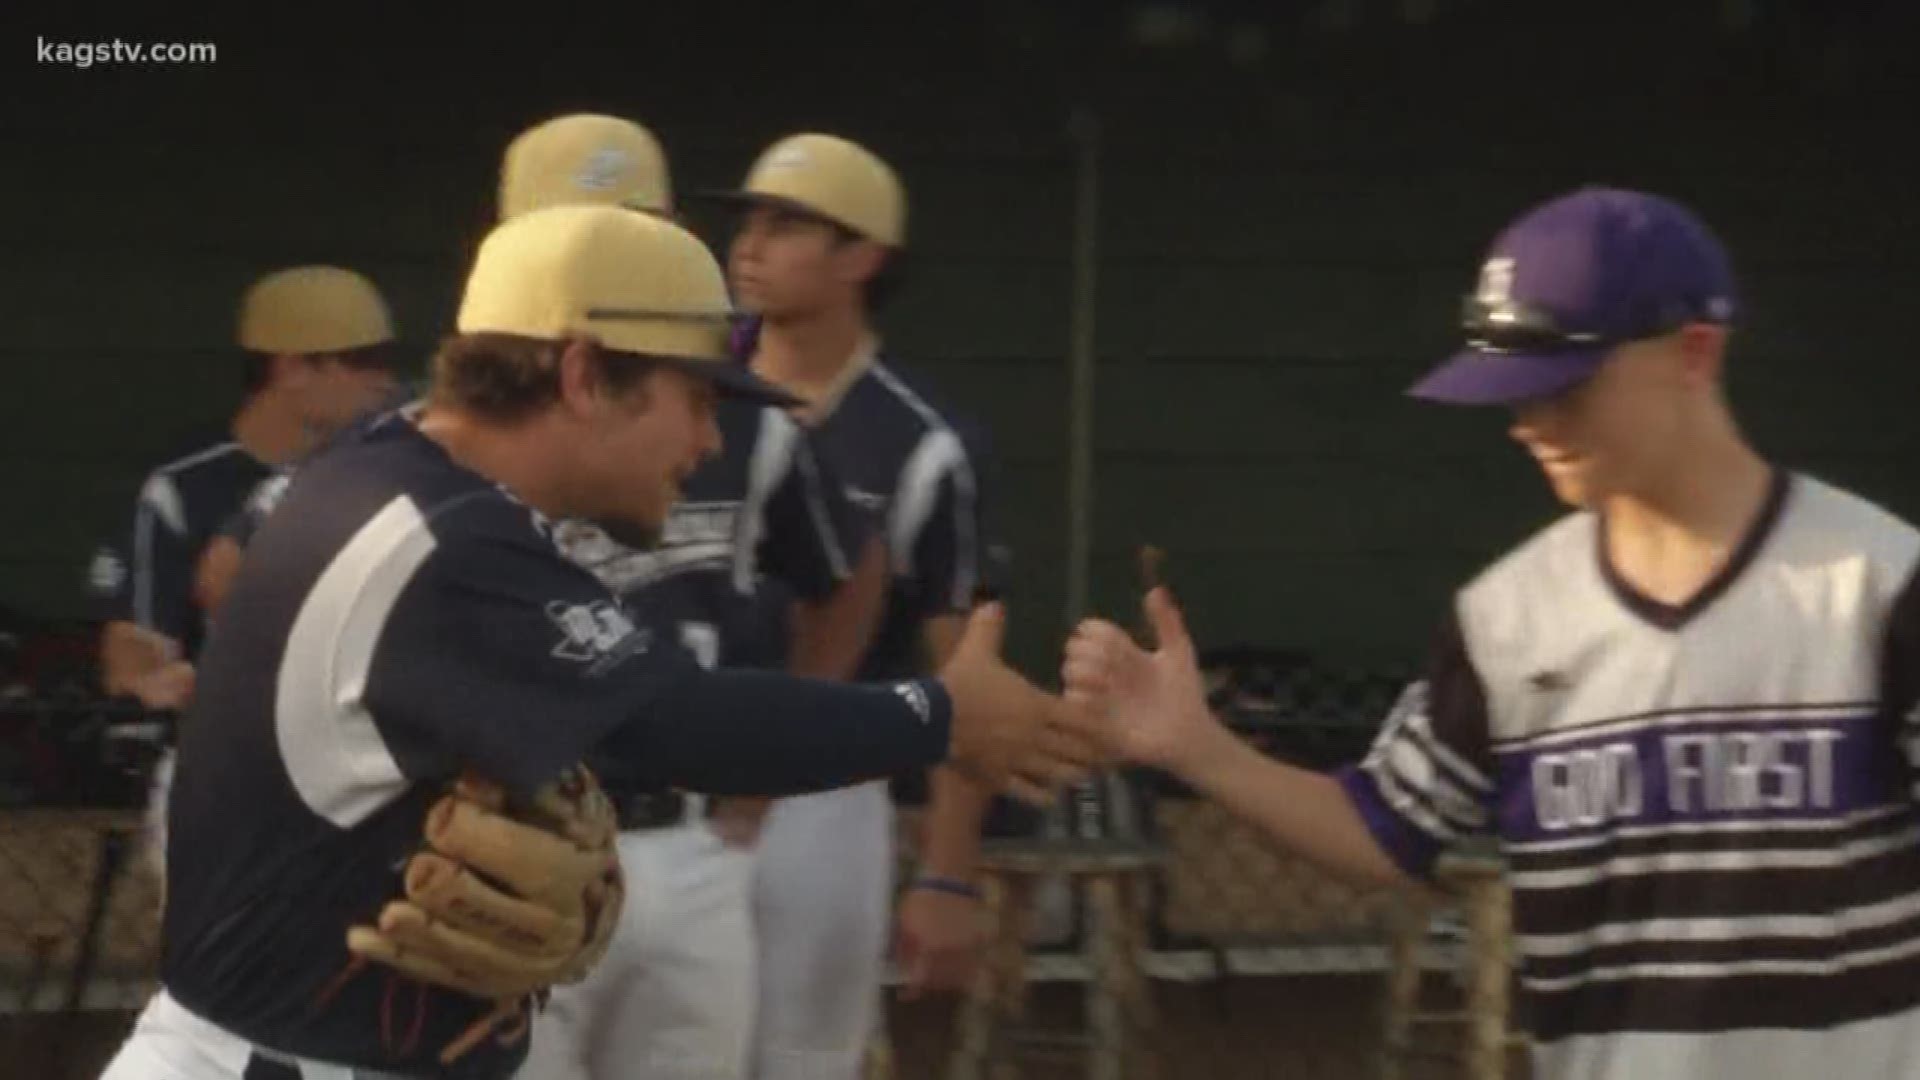 Texas A&M and Bombers infielder Ty Coleman gets mic'd up for KAGS